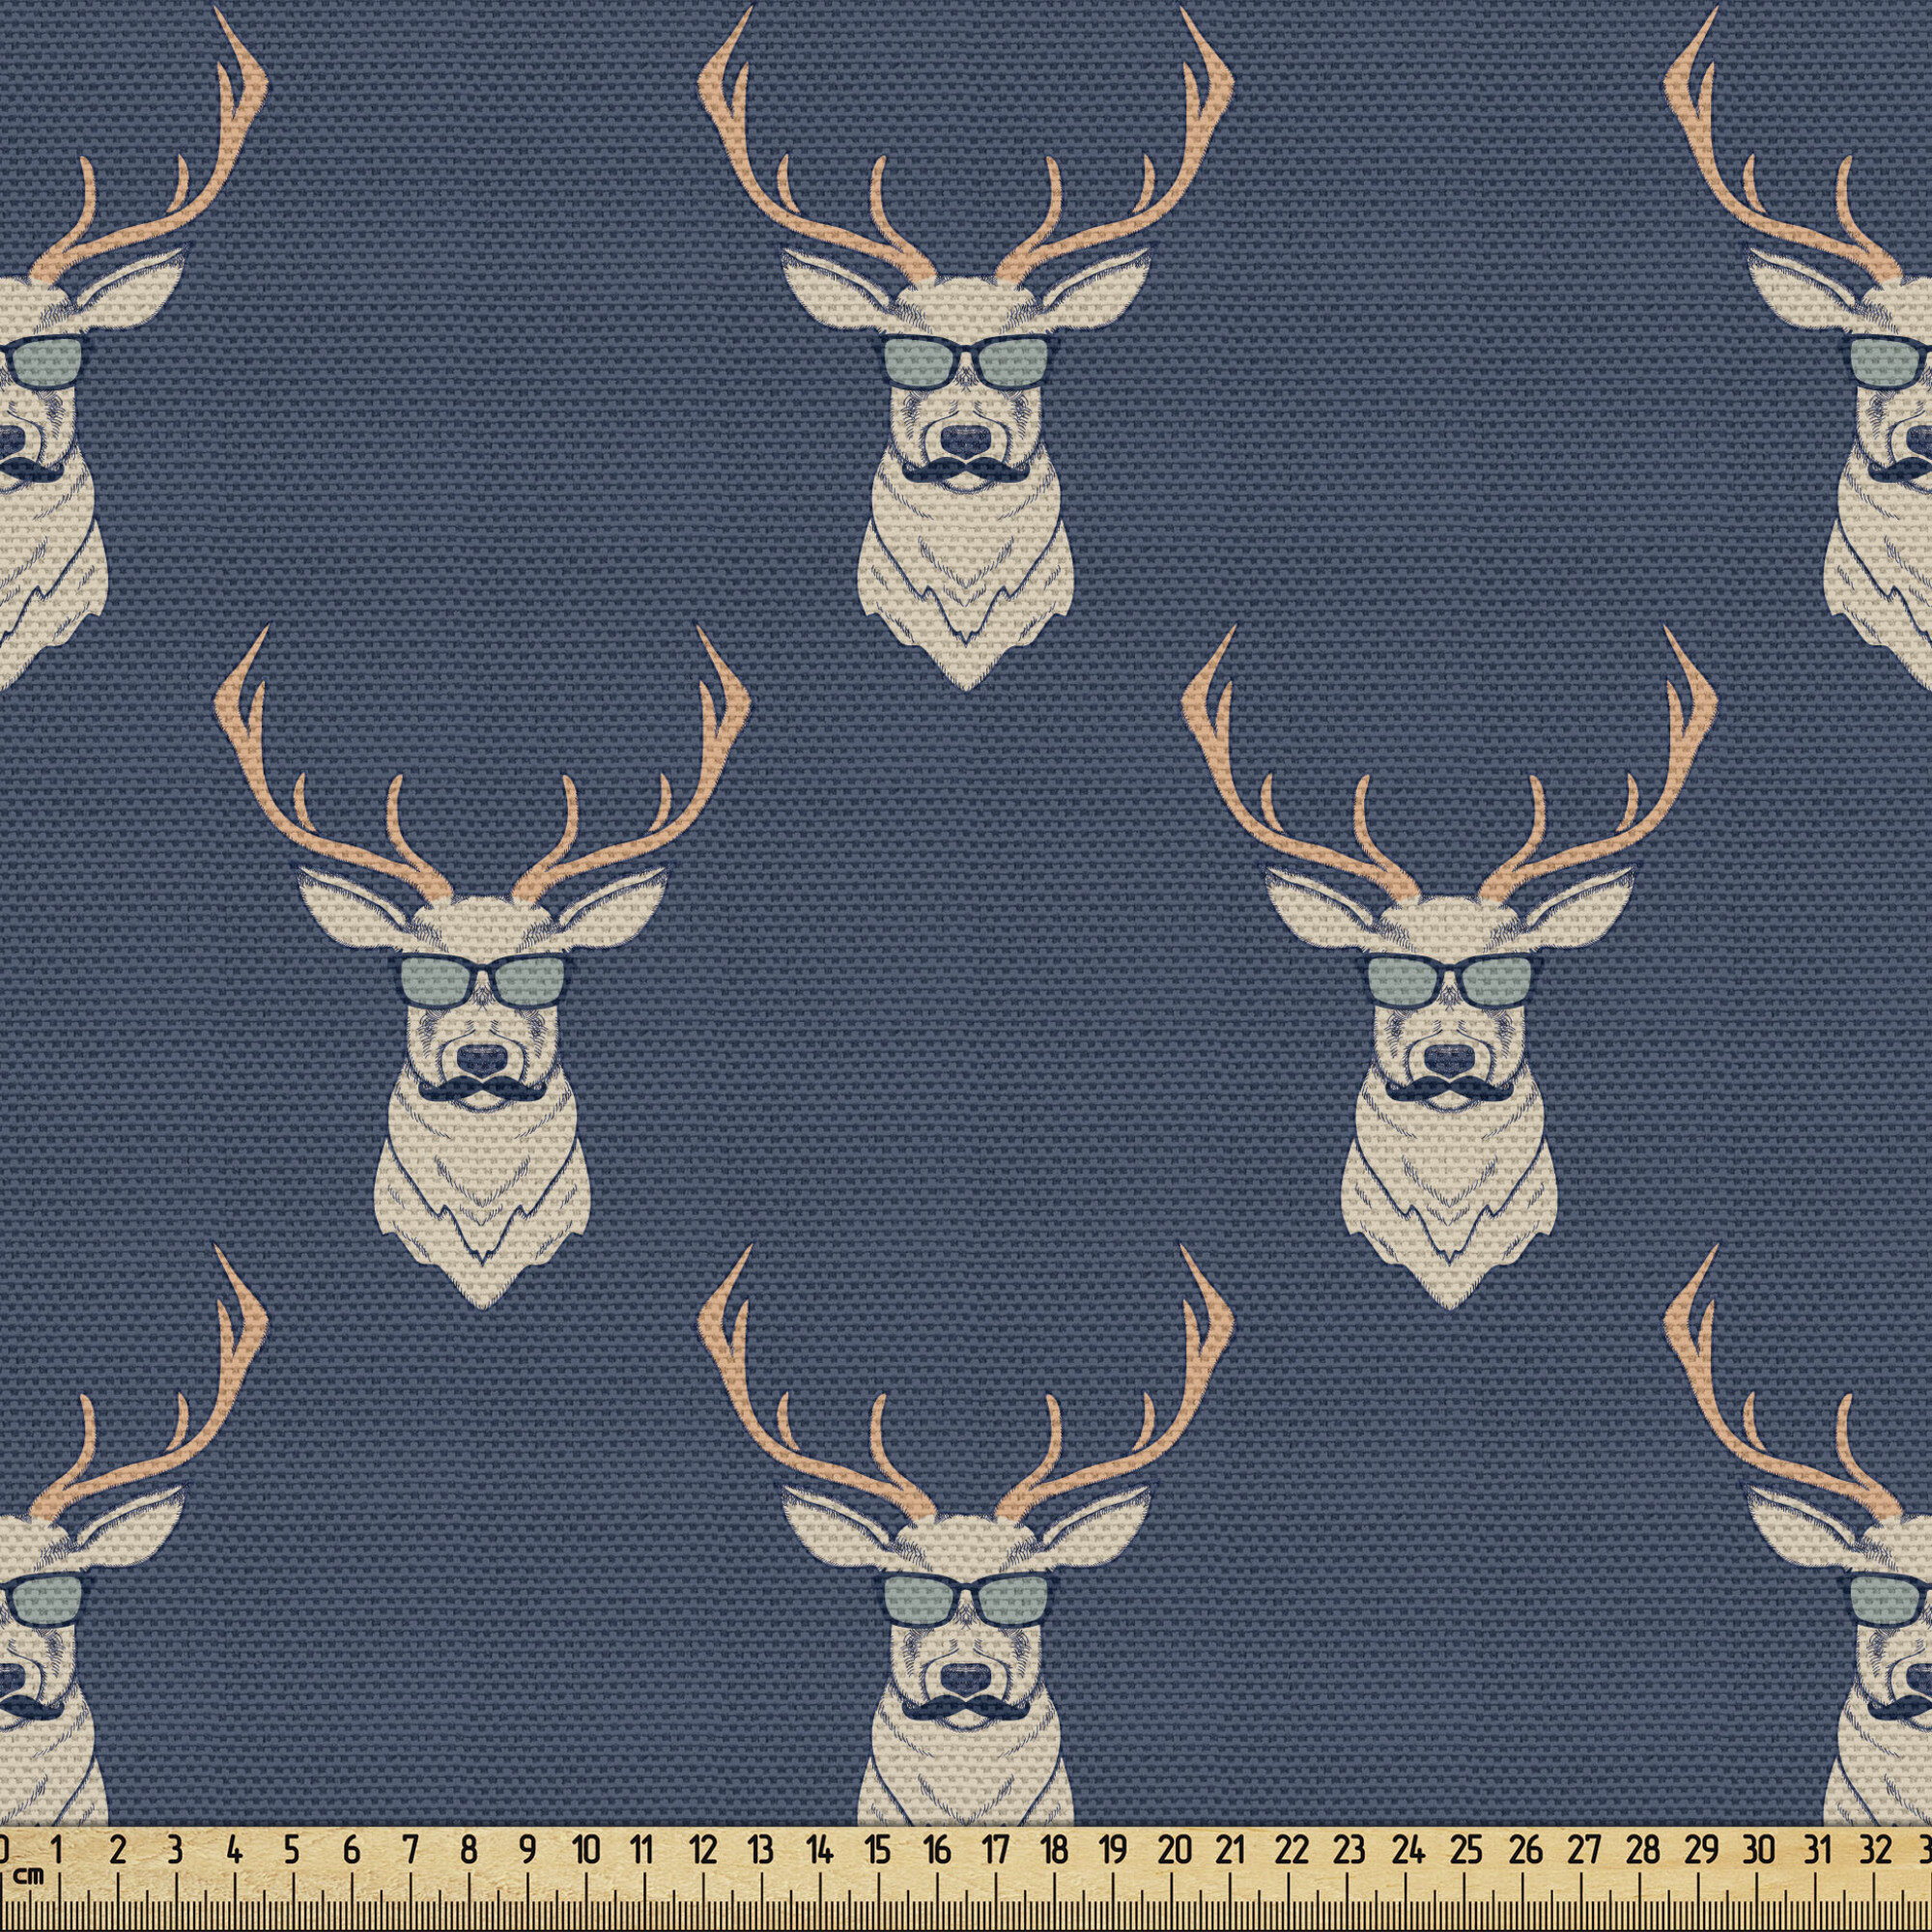 East Urban Home fab_50112_Deer Fabric By The Yard, Hipster Inspired Antlers  Glasses Mustaches Funny Animal Pattern Woodland Vintage, Decorative Fabric  For Upholstery And Home Accents, Slate Blue Tan | Wayfair